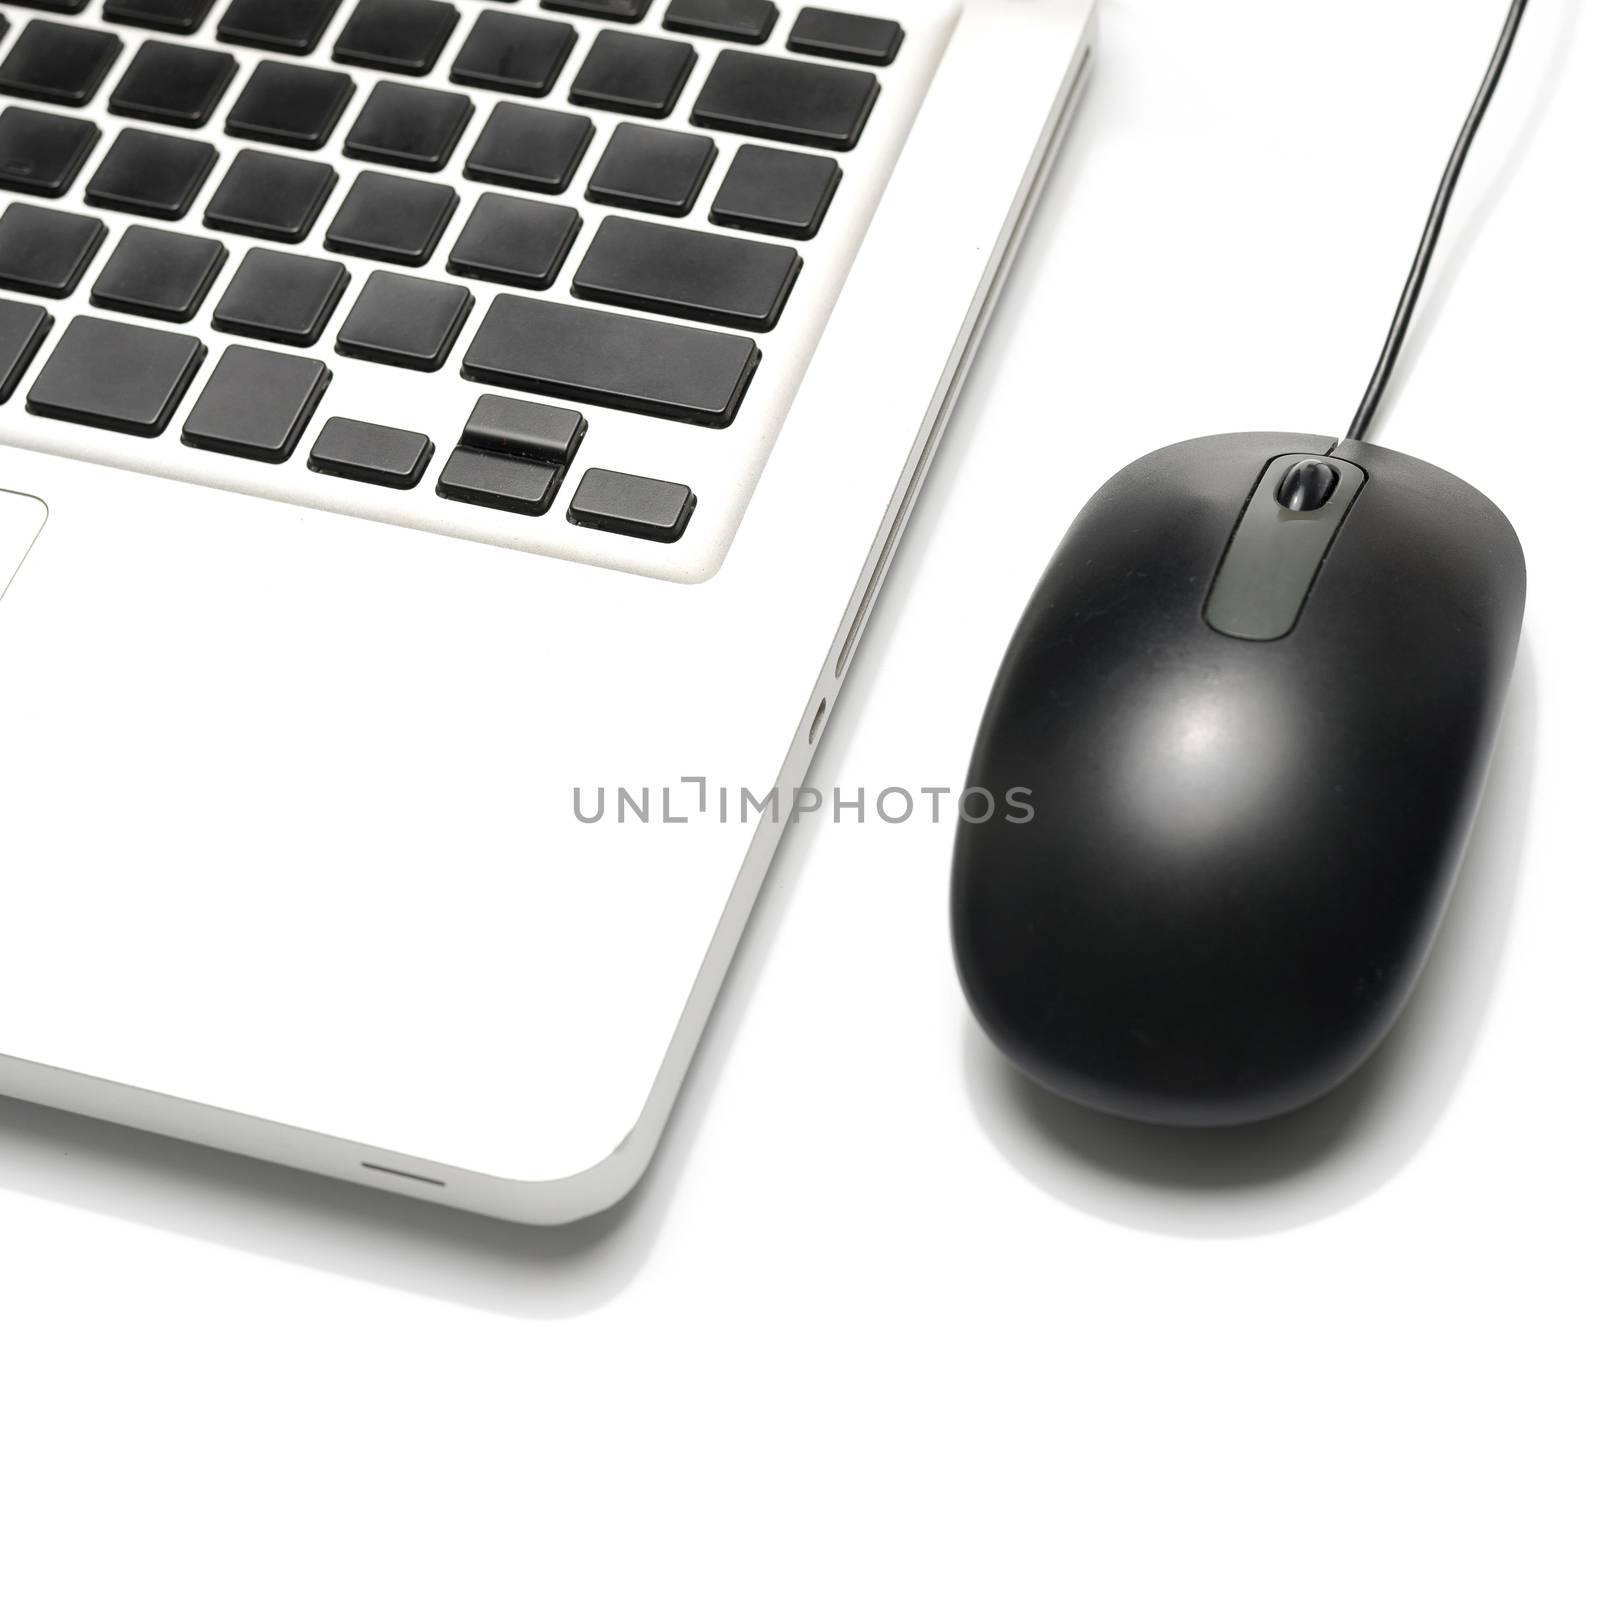 laptop and mouse isolated on white background